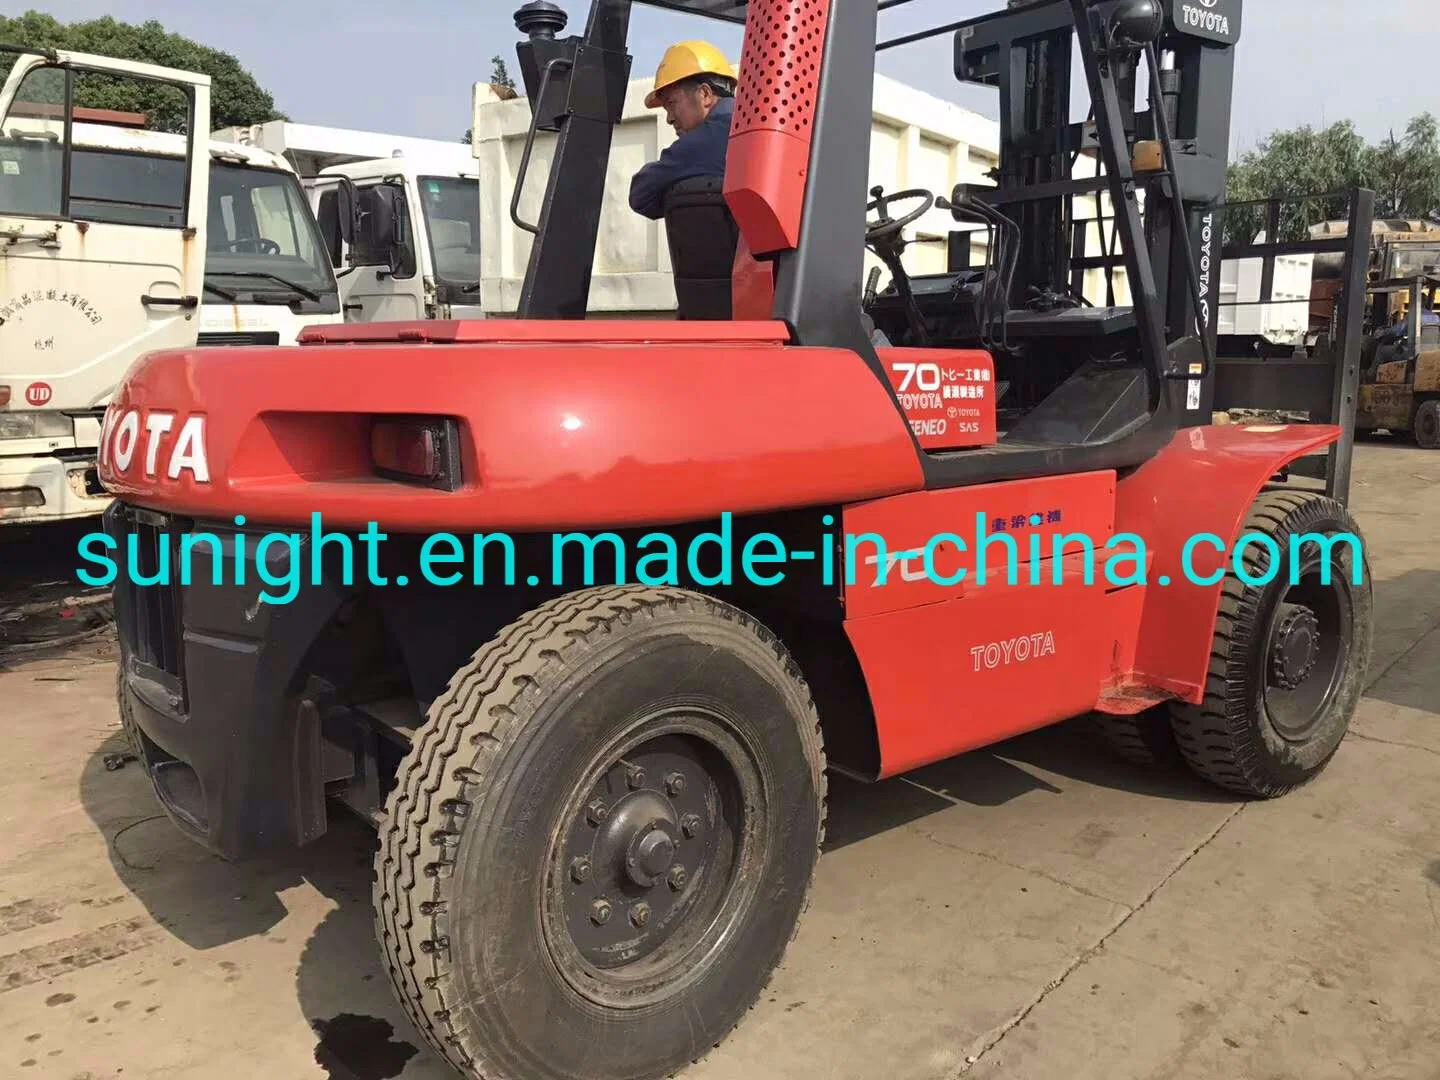 Good Price 7 Ton Forklift Japan Forklfit Toyota Fd70 with High Mast